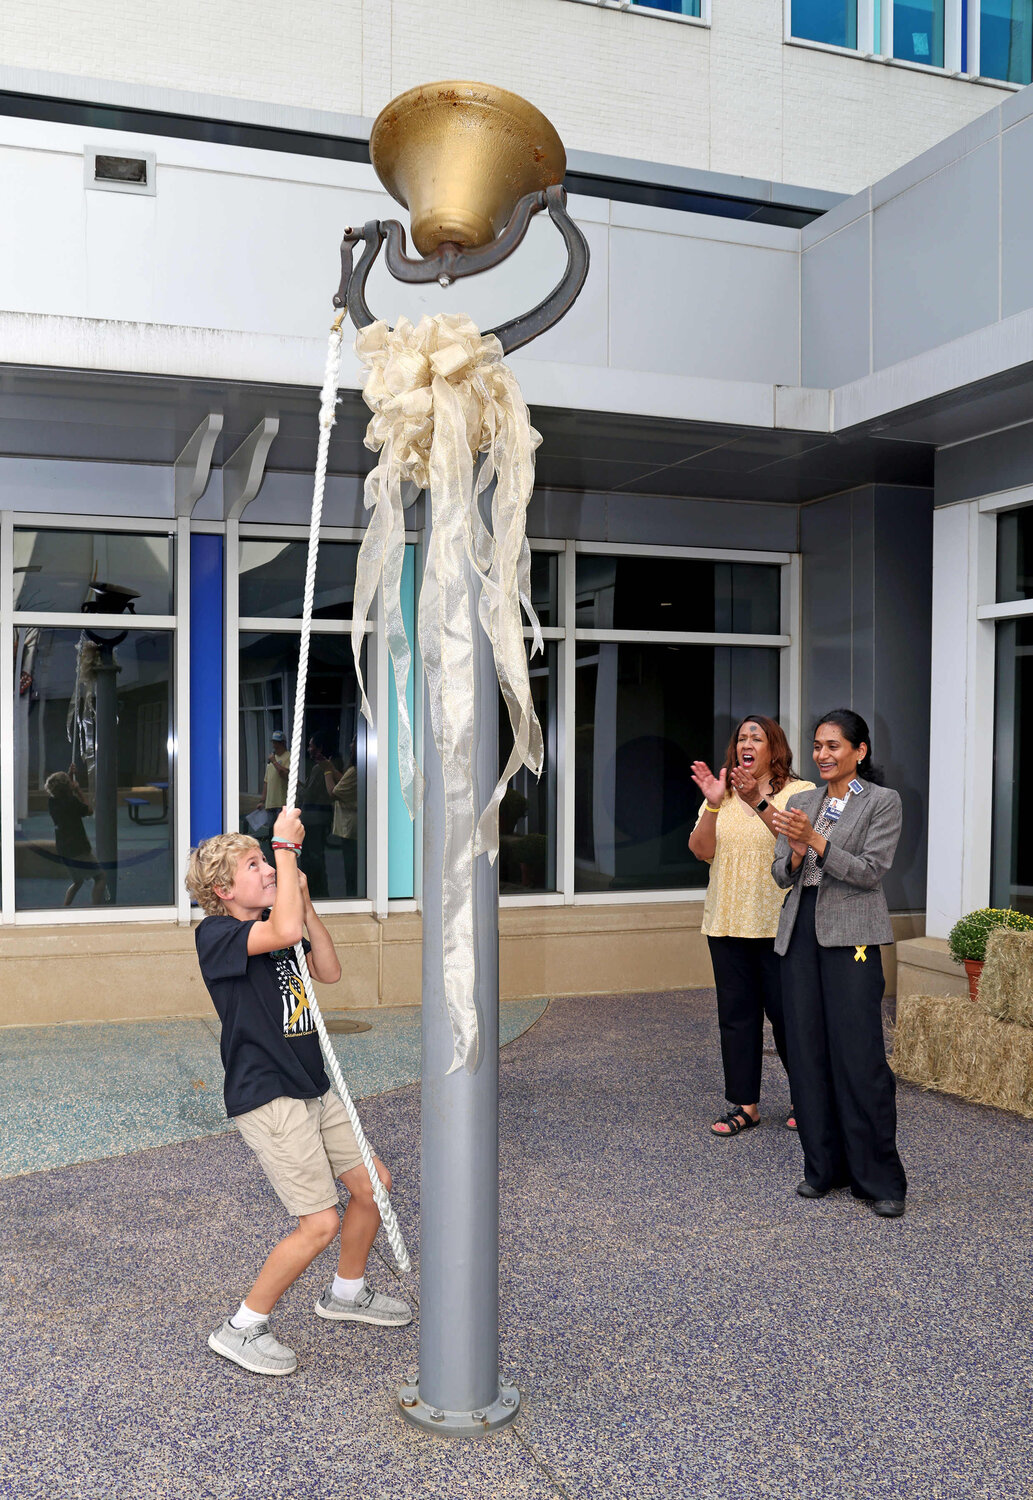 The day holds special meaning for many of the brave children, their parents and caregivers, as it often marks the beginning of a new chapter in their lives. This year's ceremony allowed each patient an opportunity to ring a large bronze bell in the hospital's courtyard as they reunited with those who cared for them.